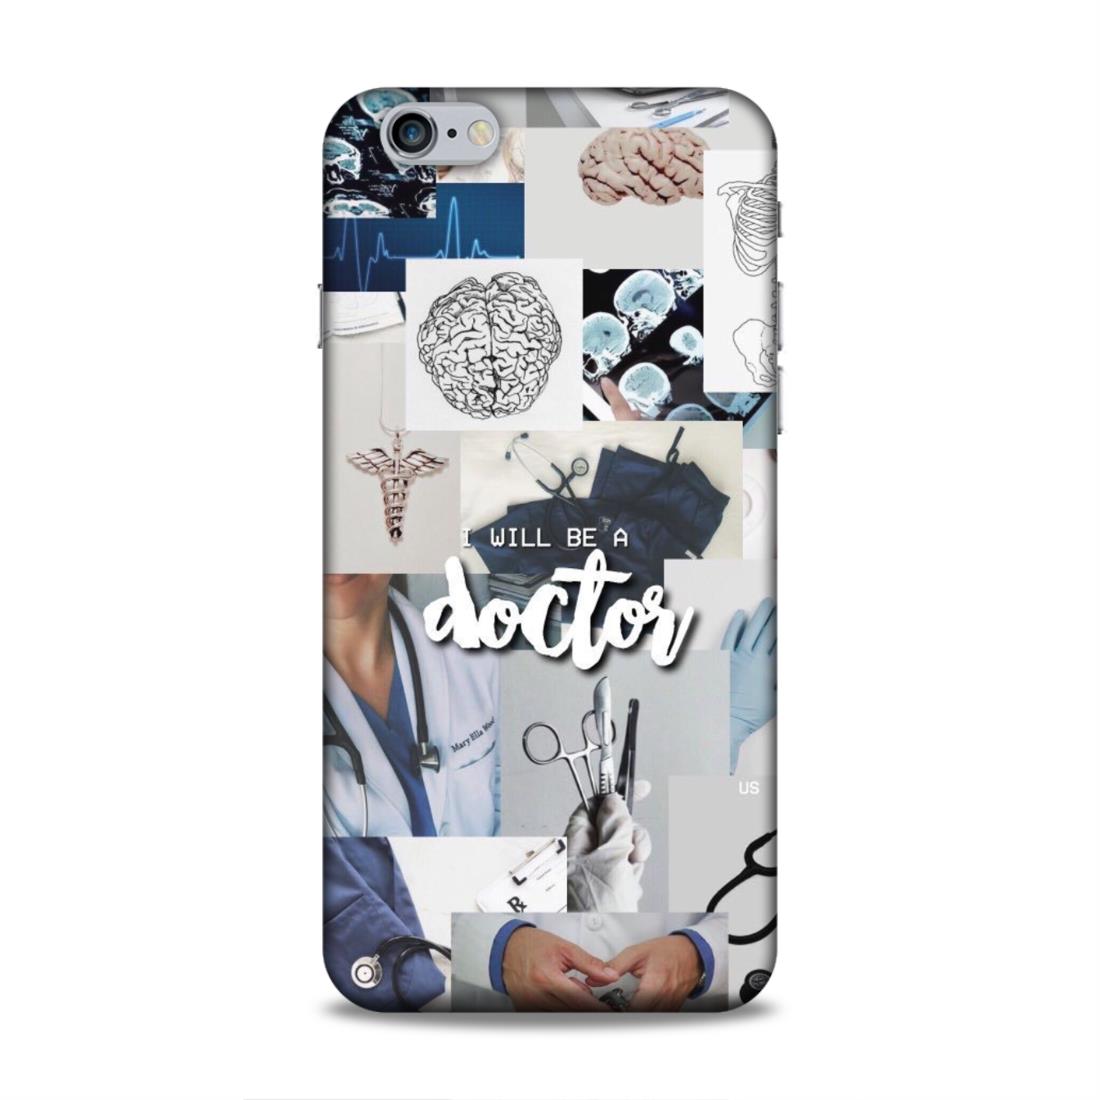 Will Be a Doctor Hard Back Case For Apple iPhone 6 Plus / 6s Plus